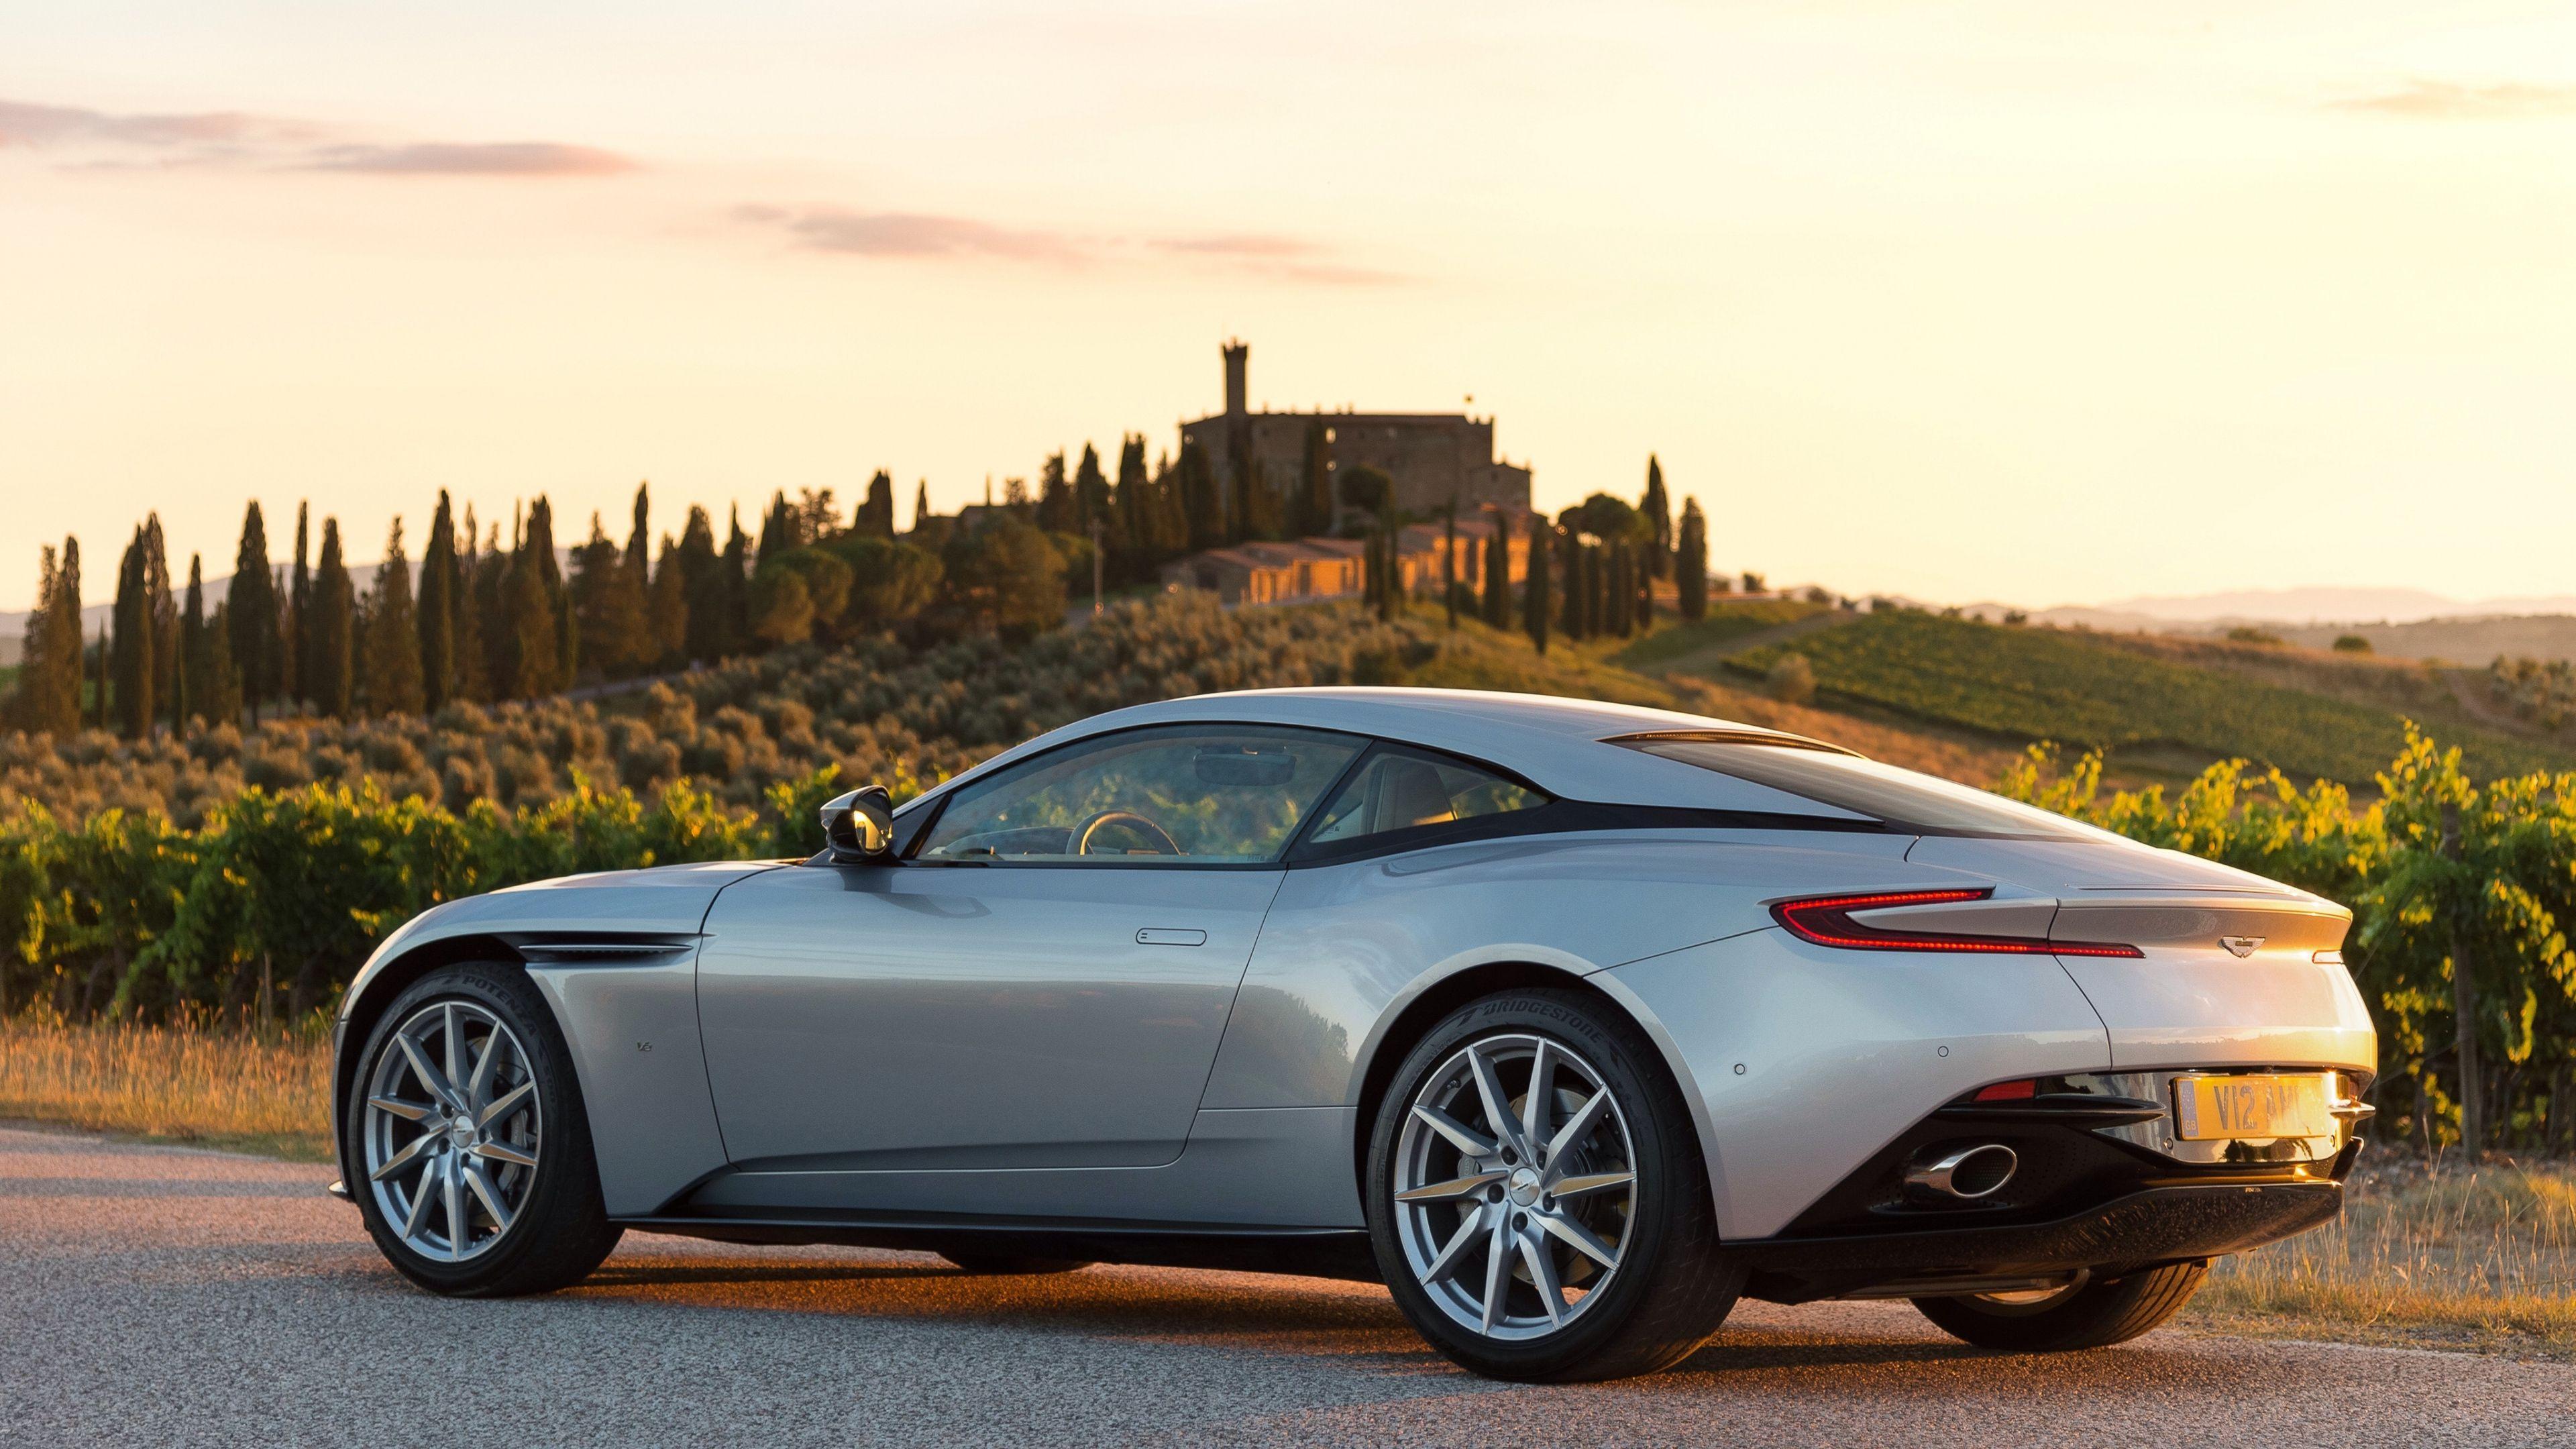 Download Wallpapers 3840x2160 Aston martin, Db11, Side view 4K